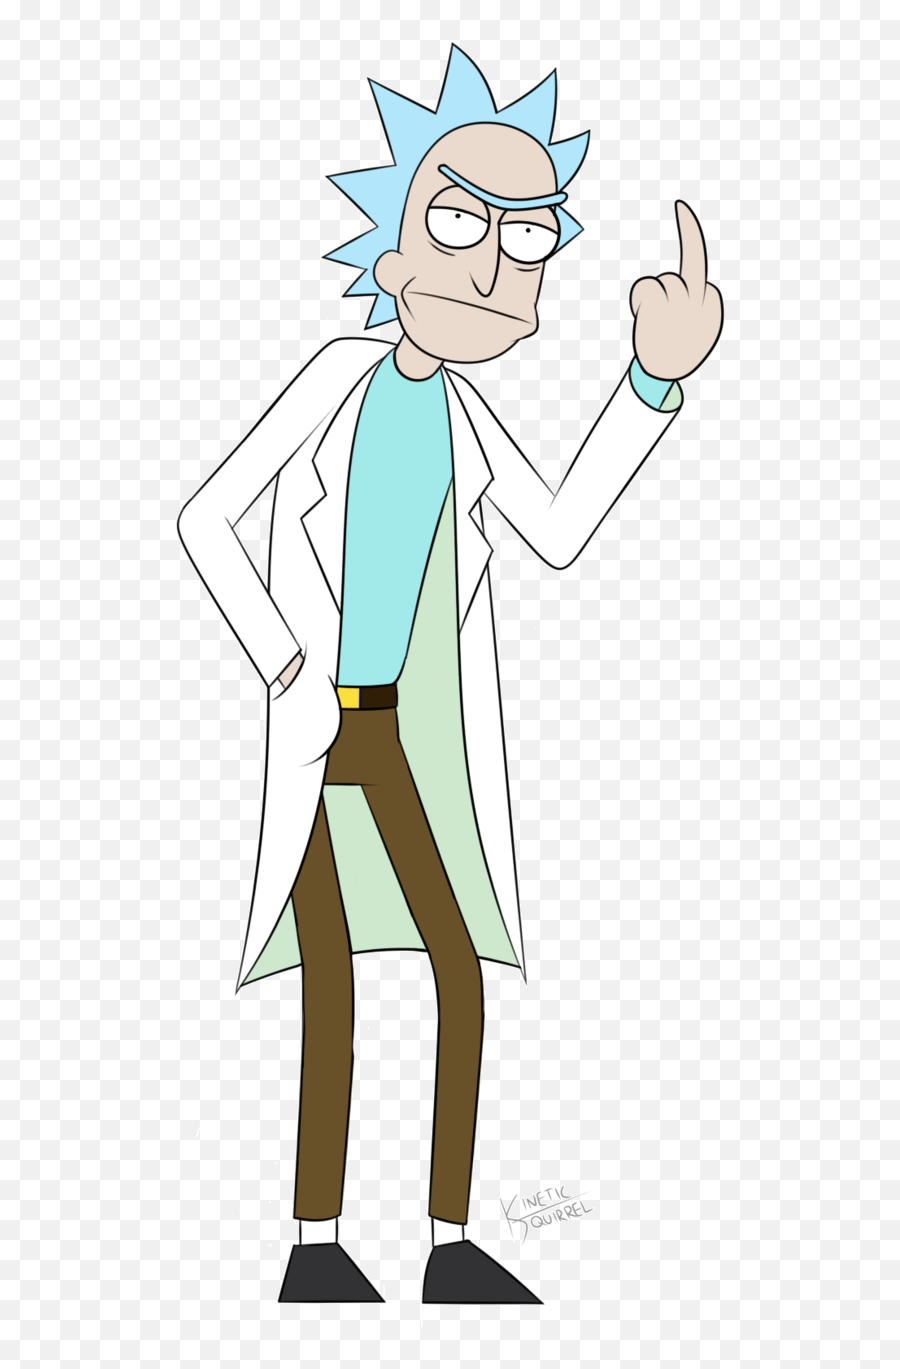 Gif Rick Et Morty Png 5 Images - Rick And Morty Transparent Gif,Rick And Morty Png